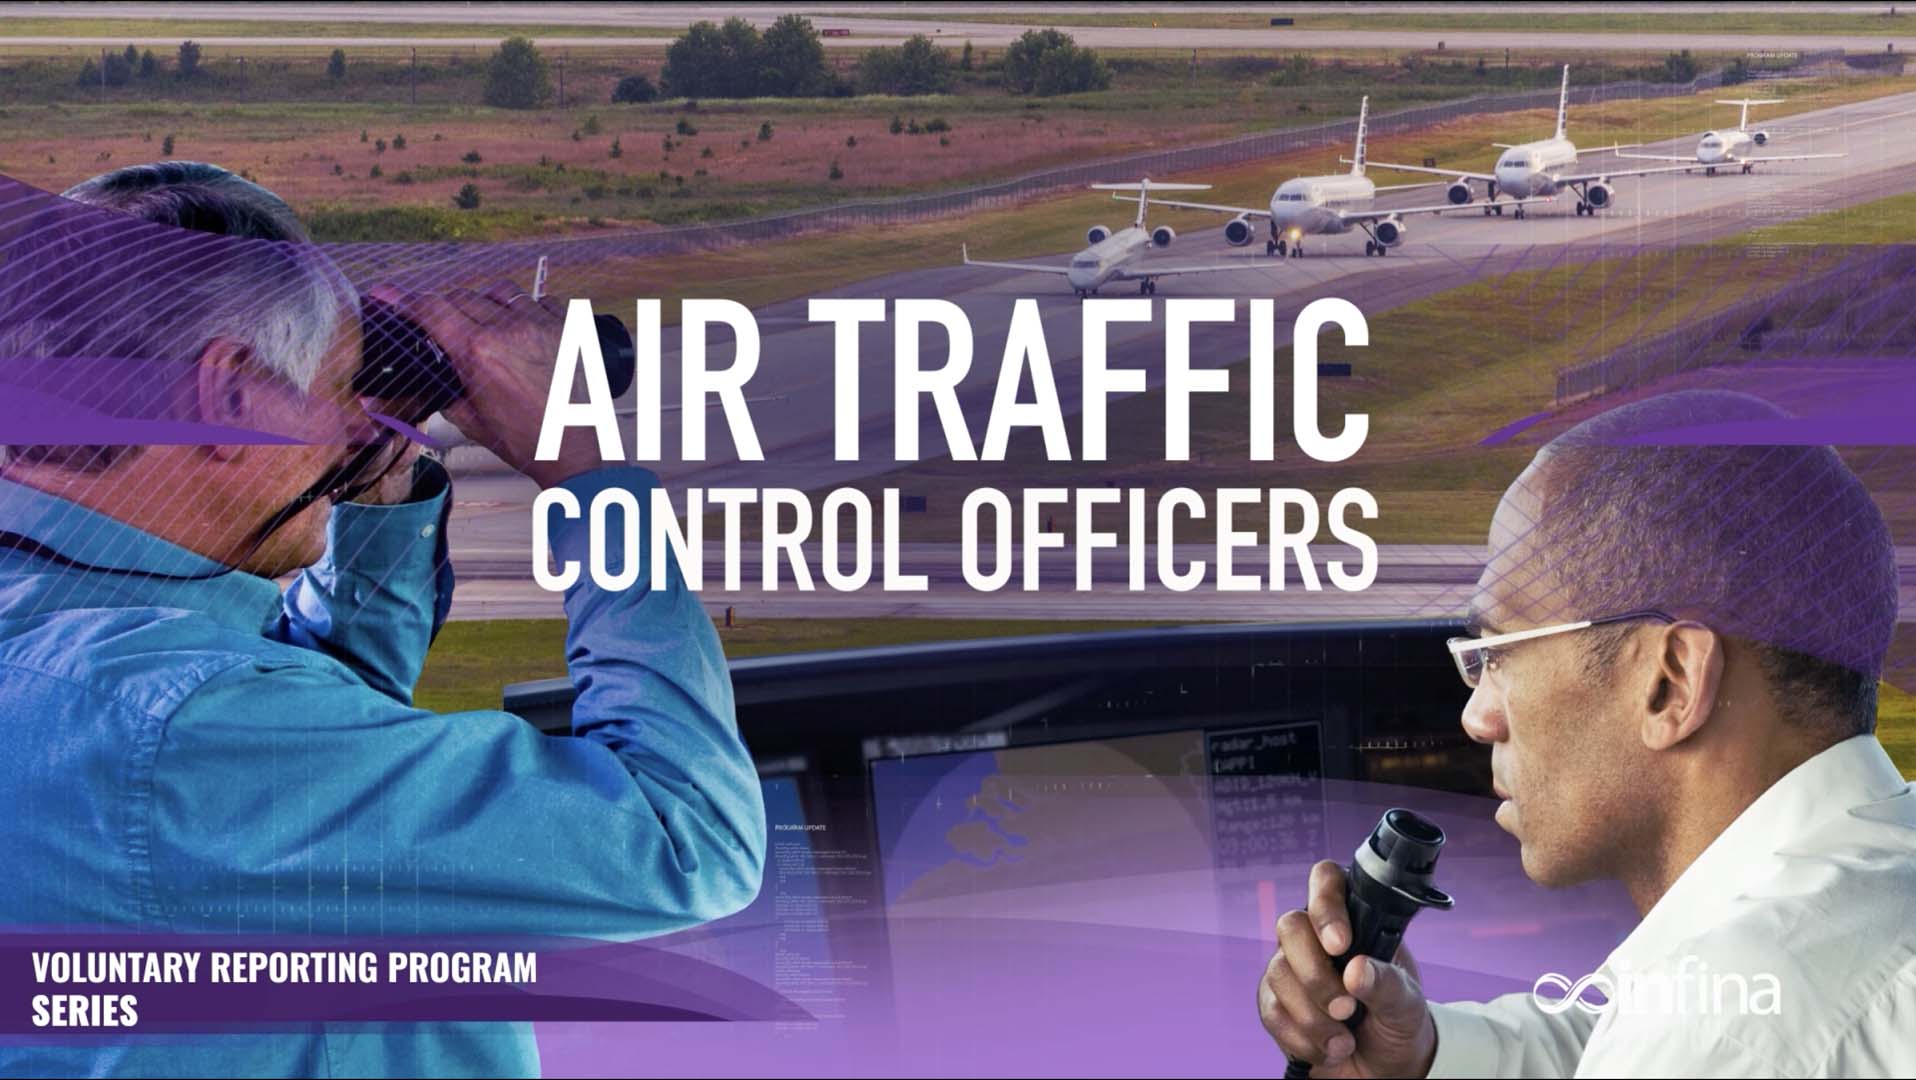 Voluntary Reporting Program: Air Traffic Control Officers